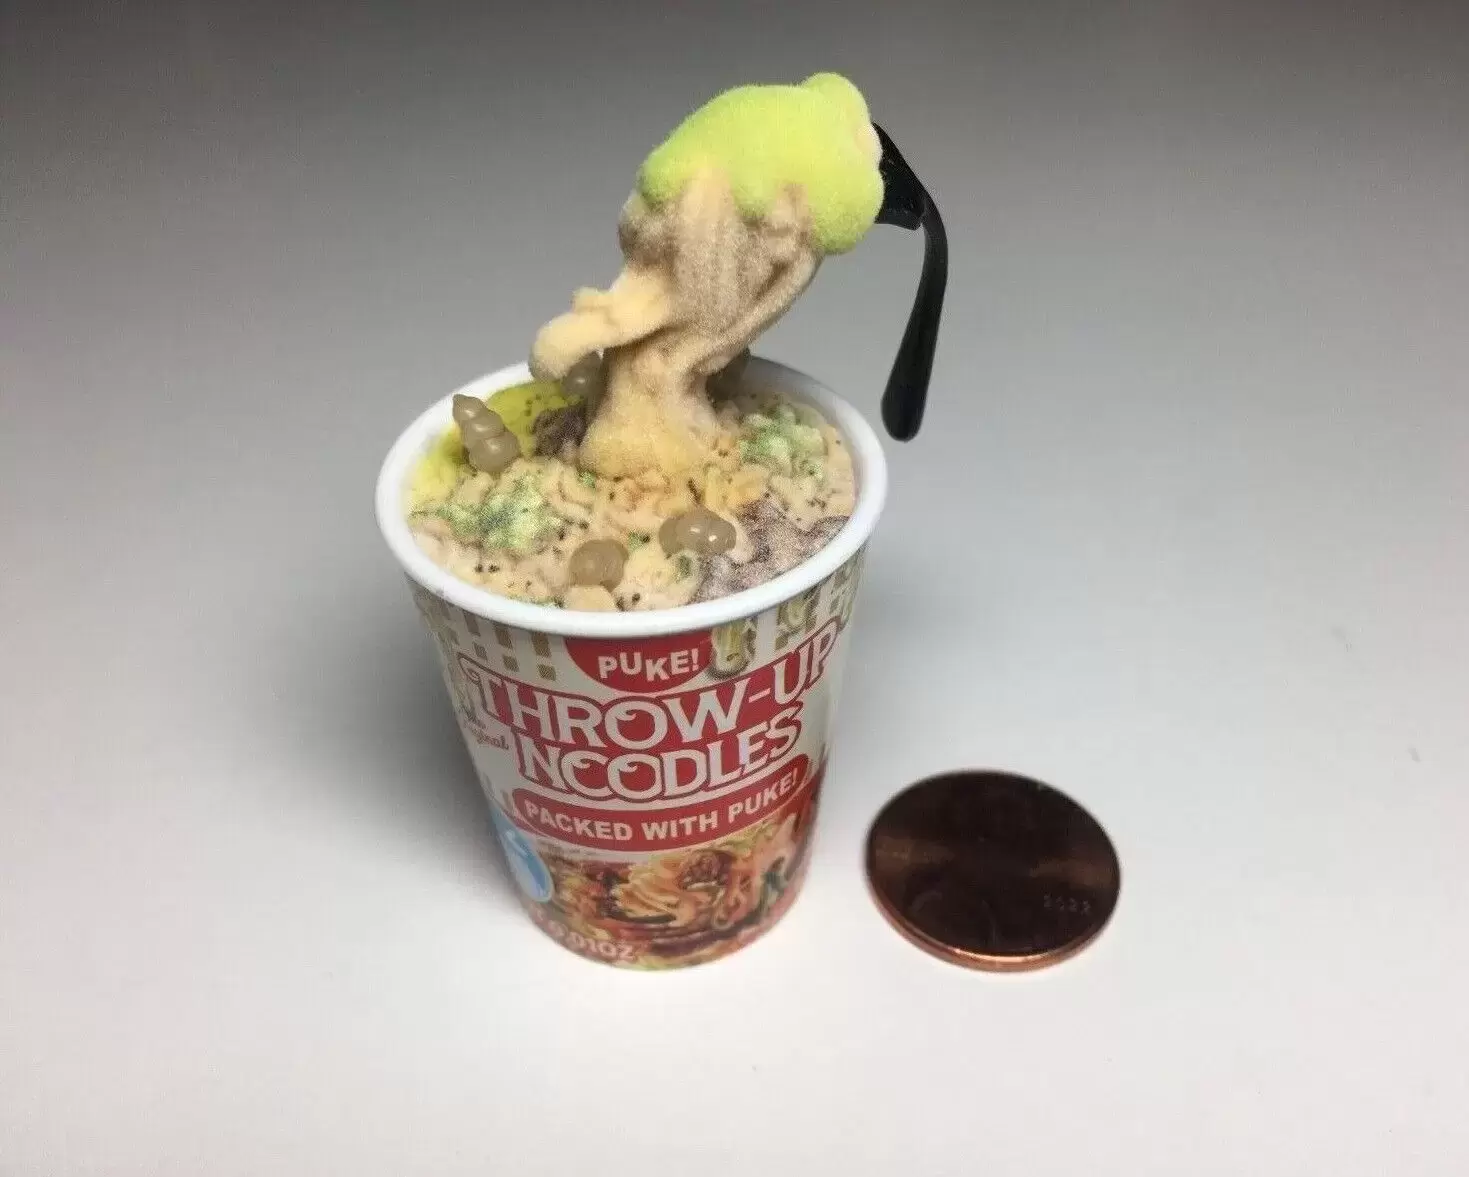 Throw-Up Noodles Packed With Puke Moldy - Mega Gross Minis action figure